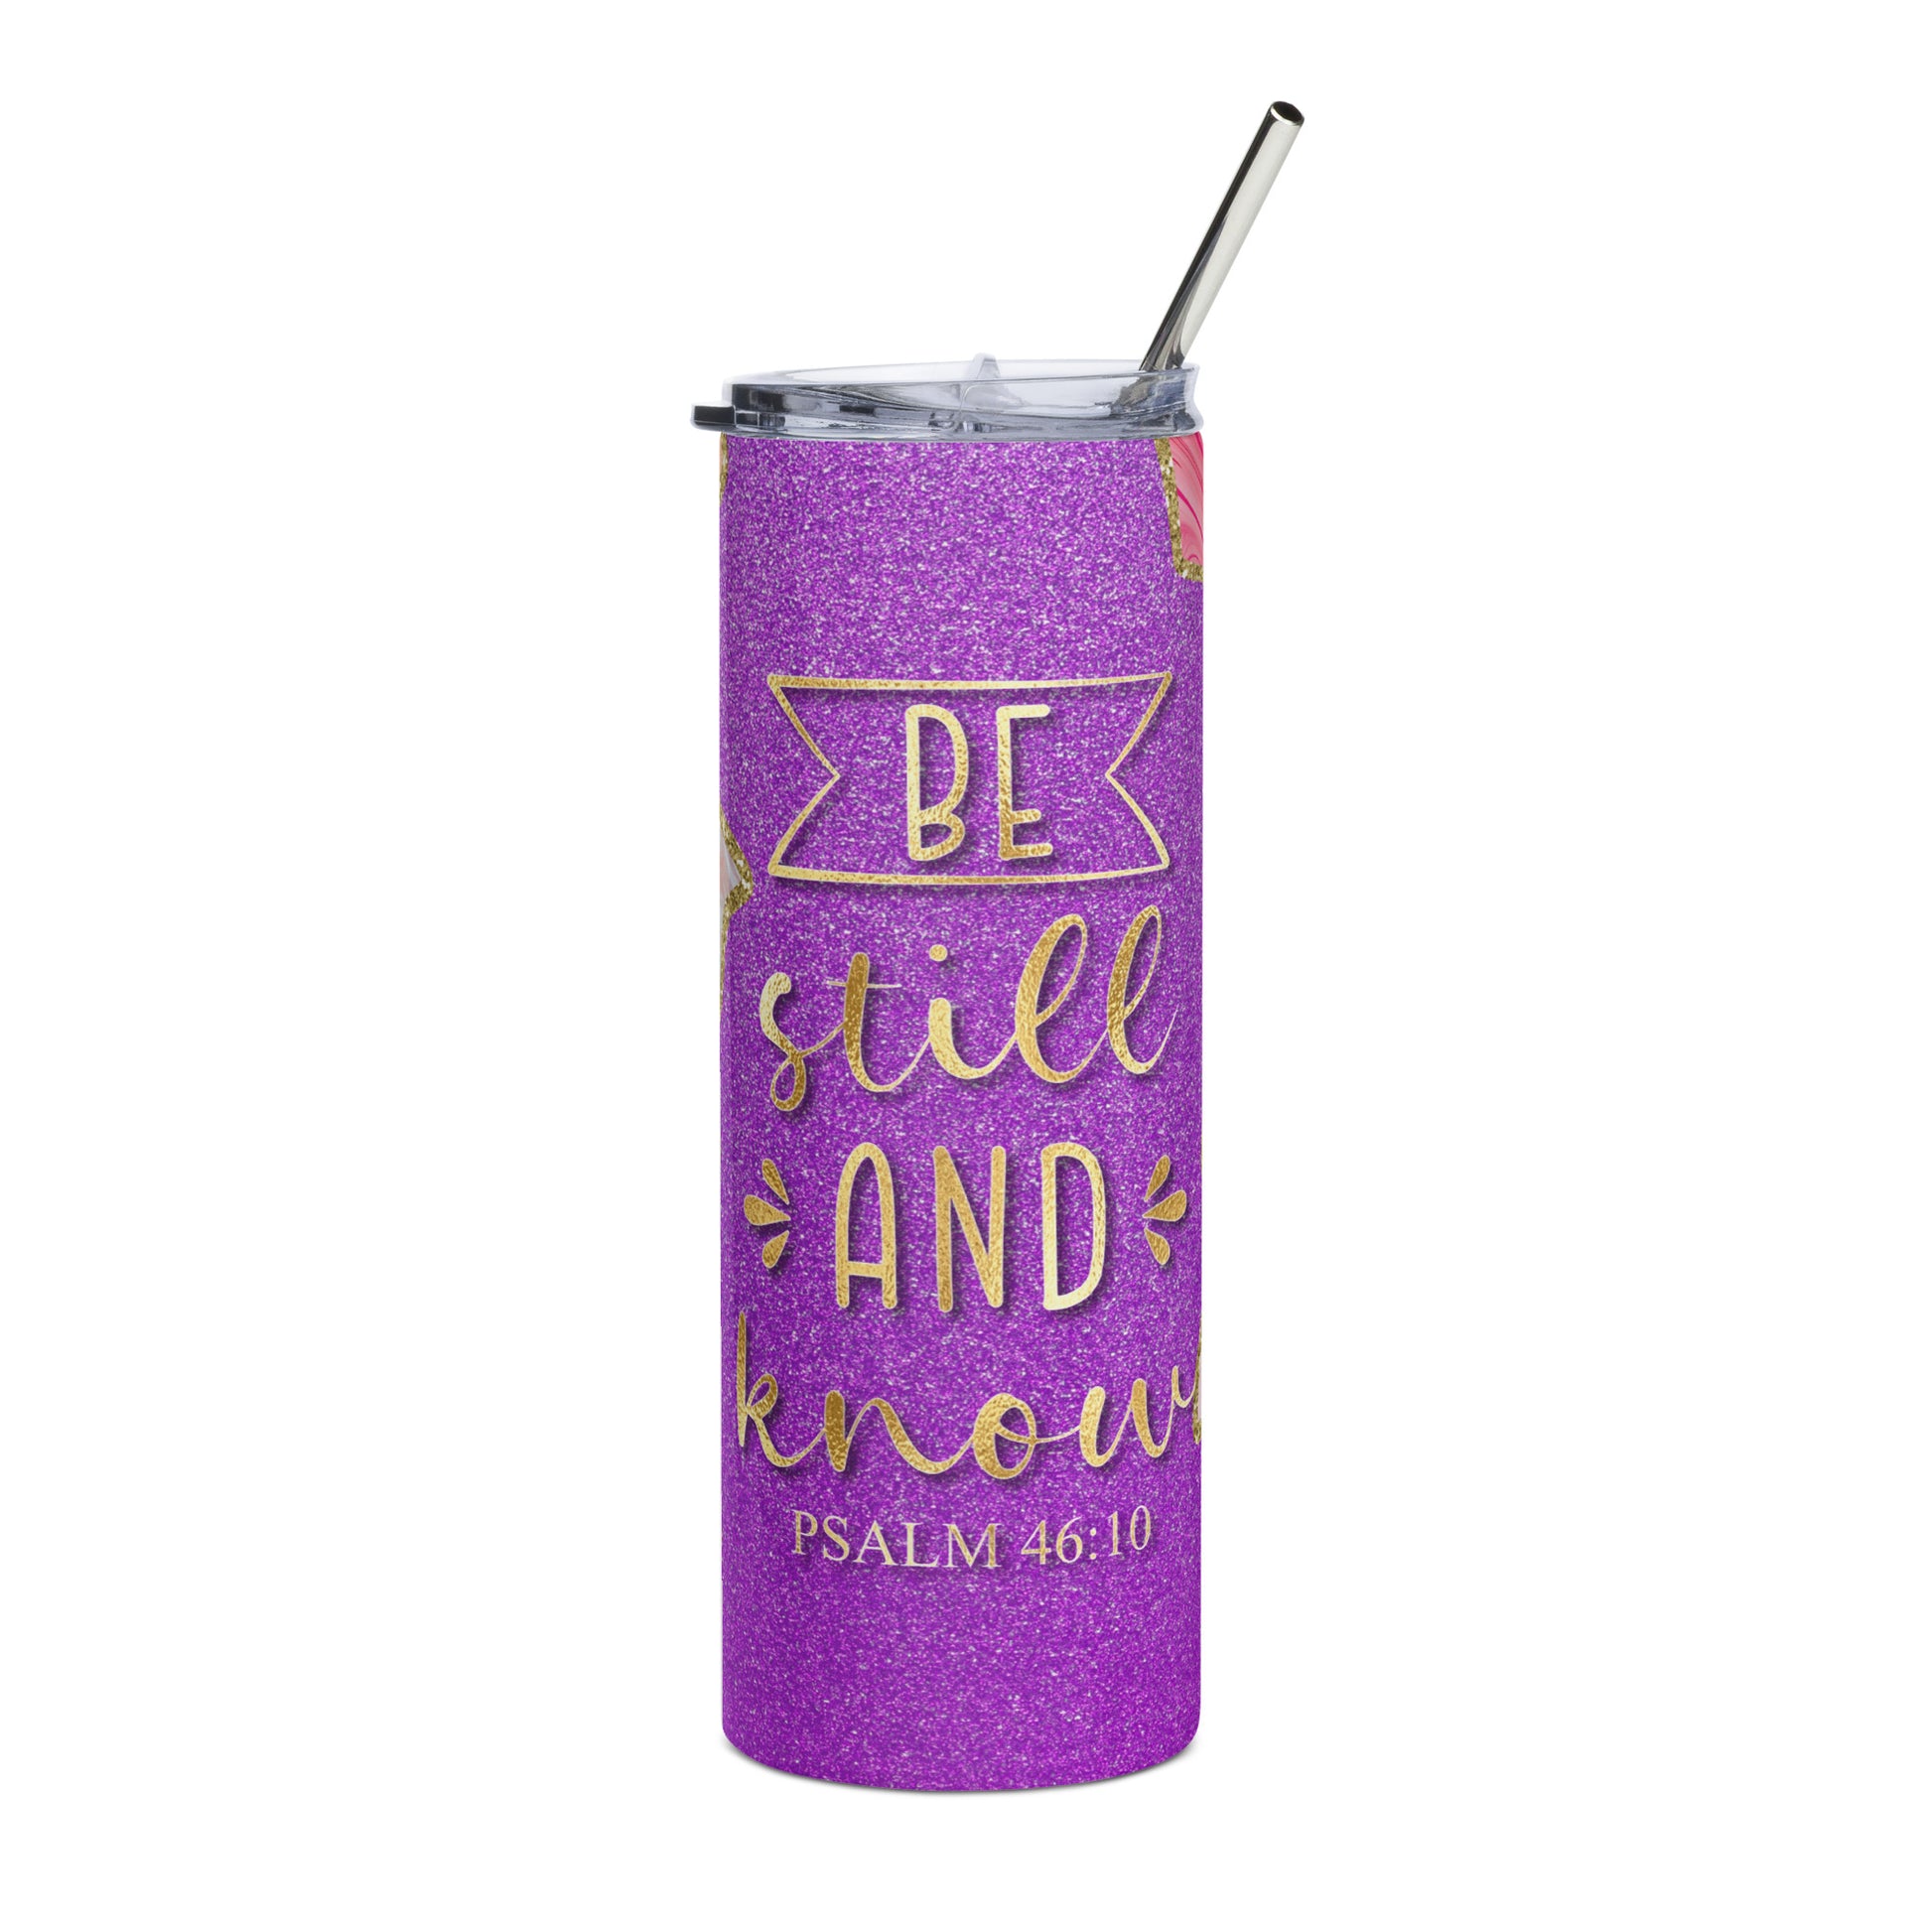 A 20 oz stainless steel tumbler with the motivational message "Be Still And Know" on the front, equipped with a lid and straw.